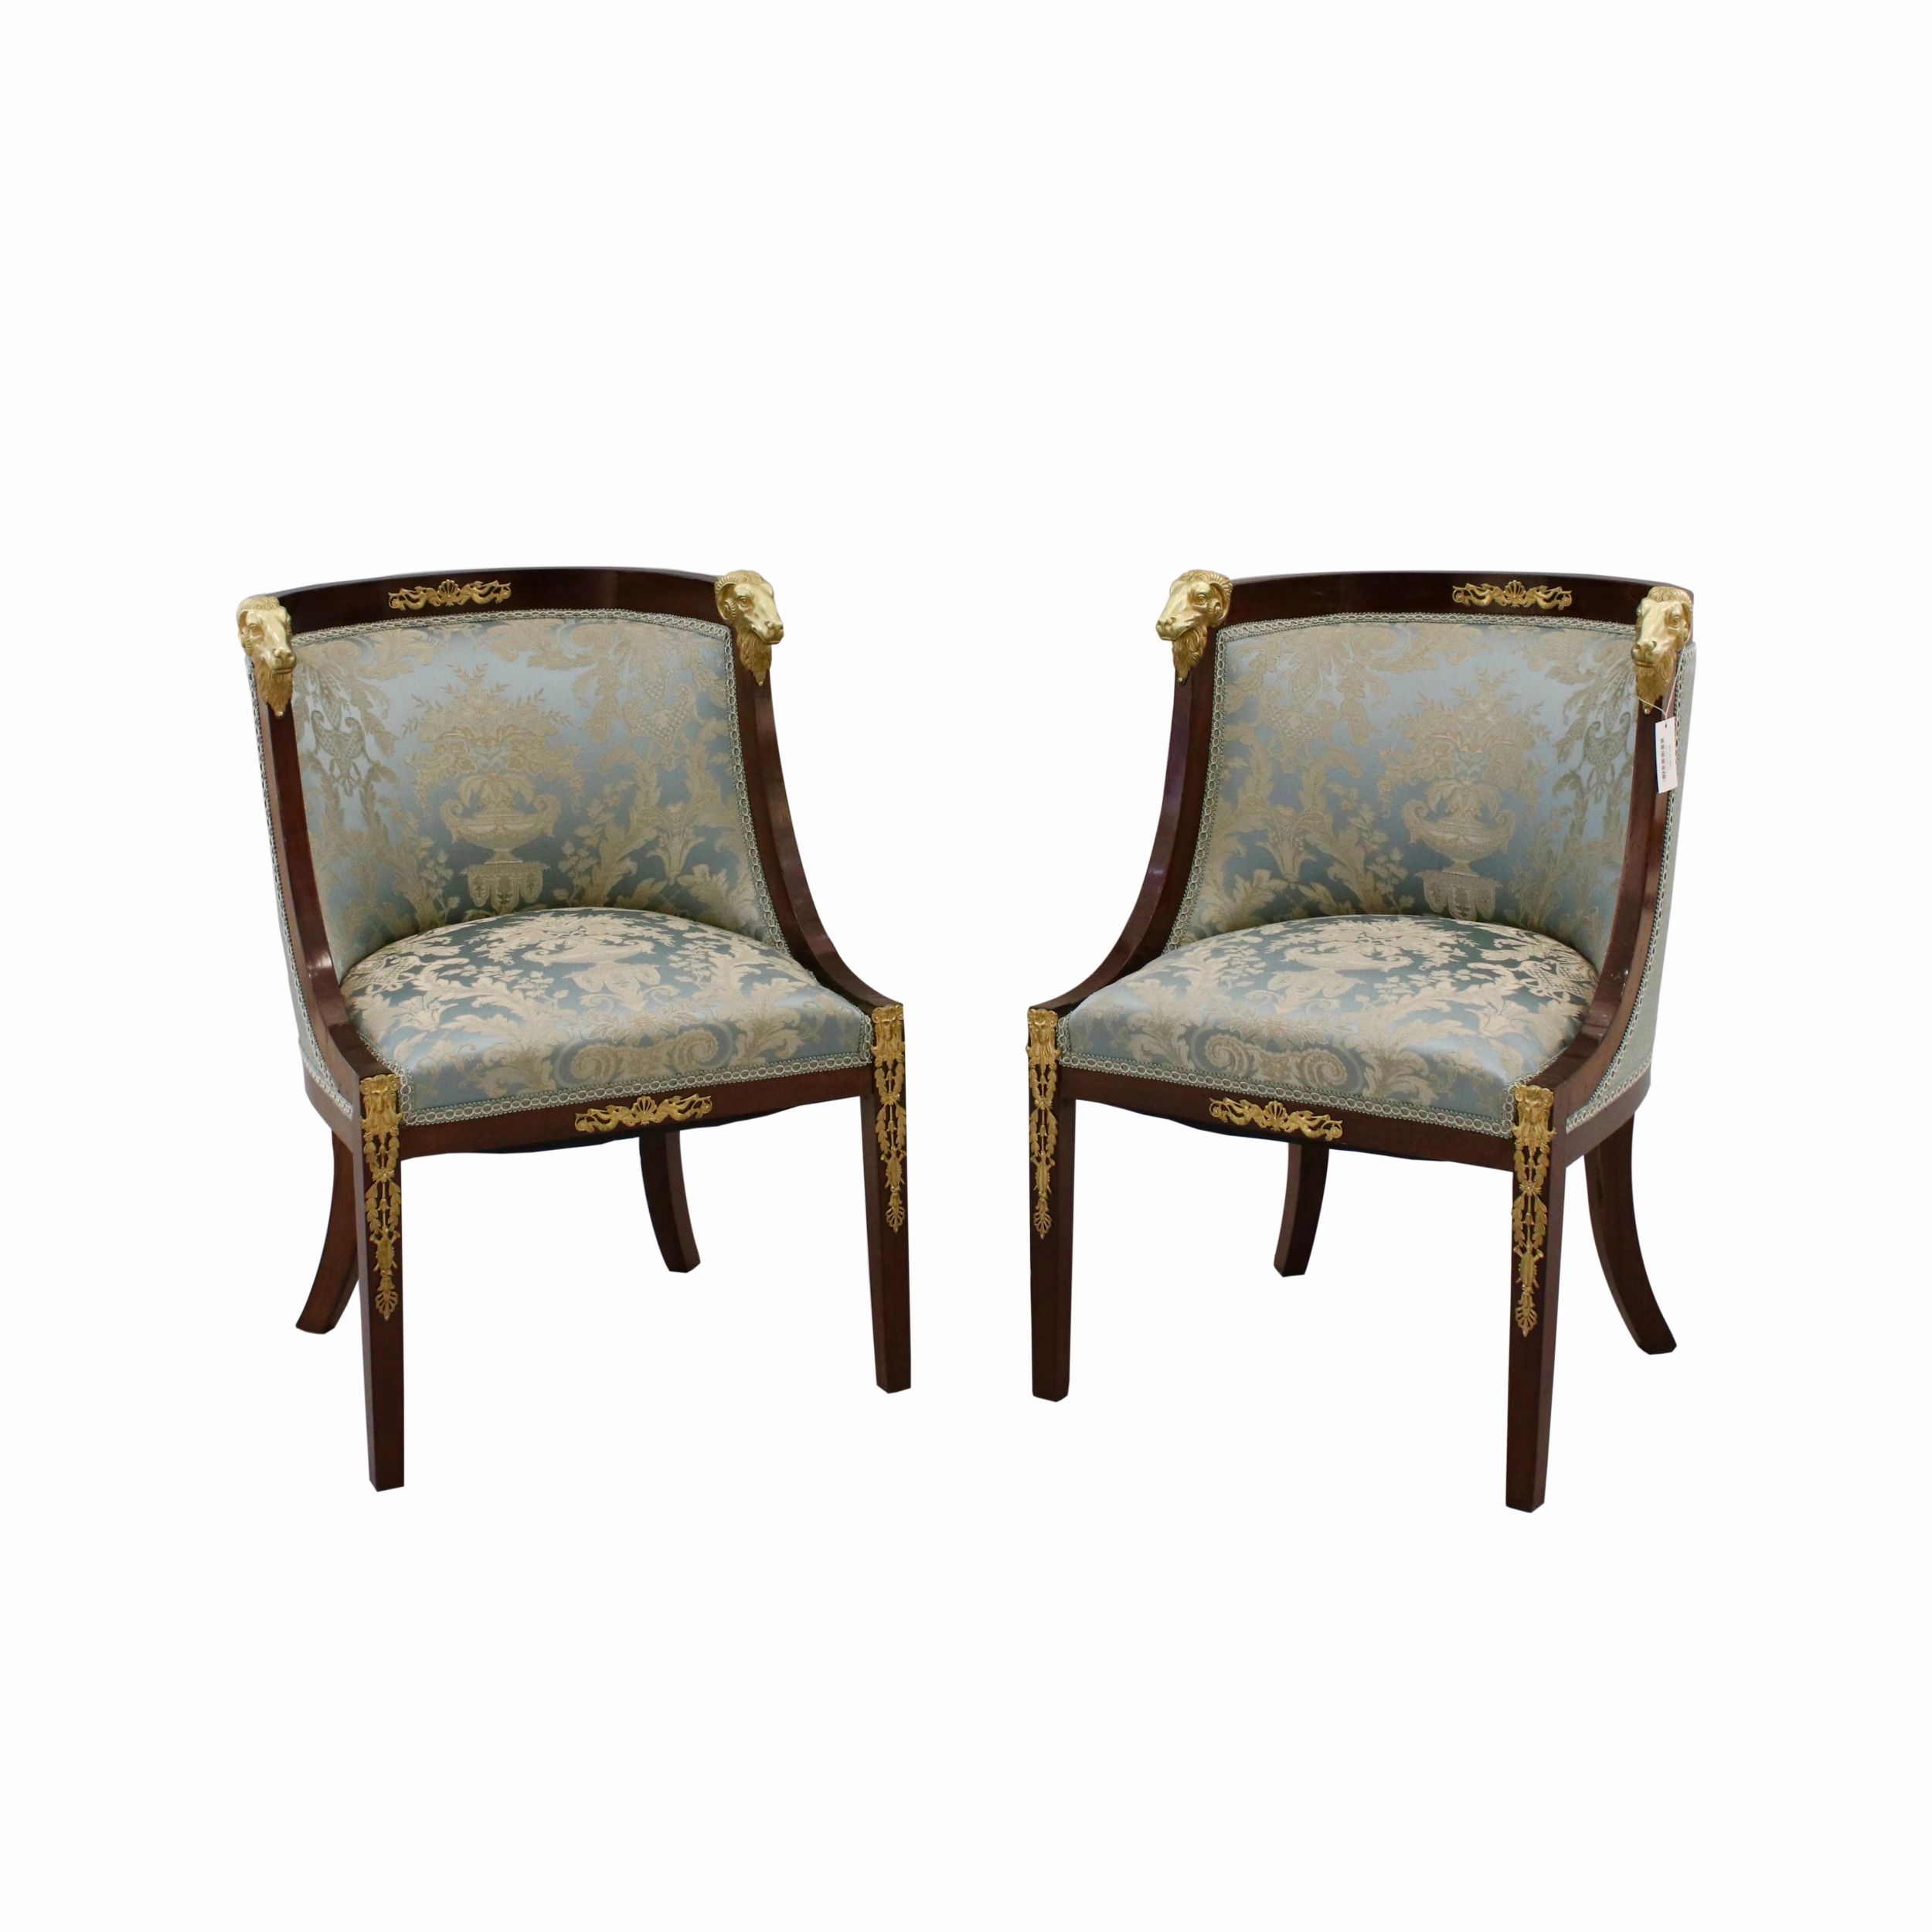 Pair-of-armchairs-in-the-Empire-style-